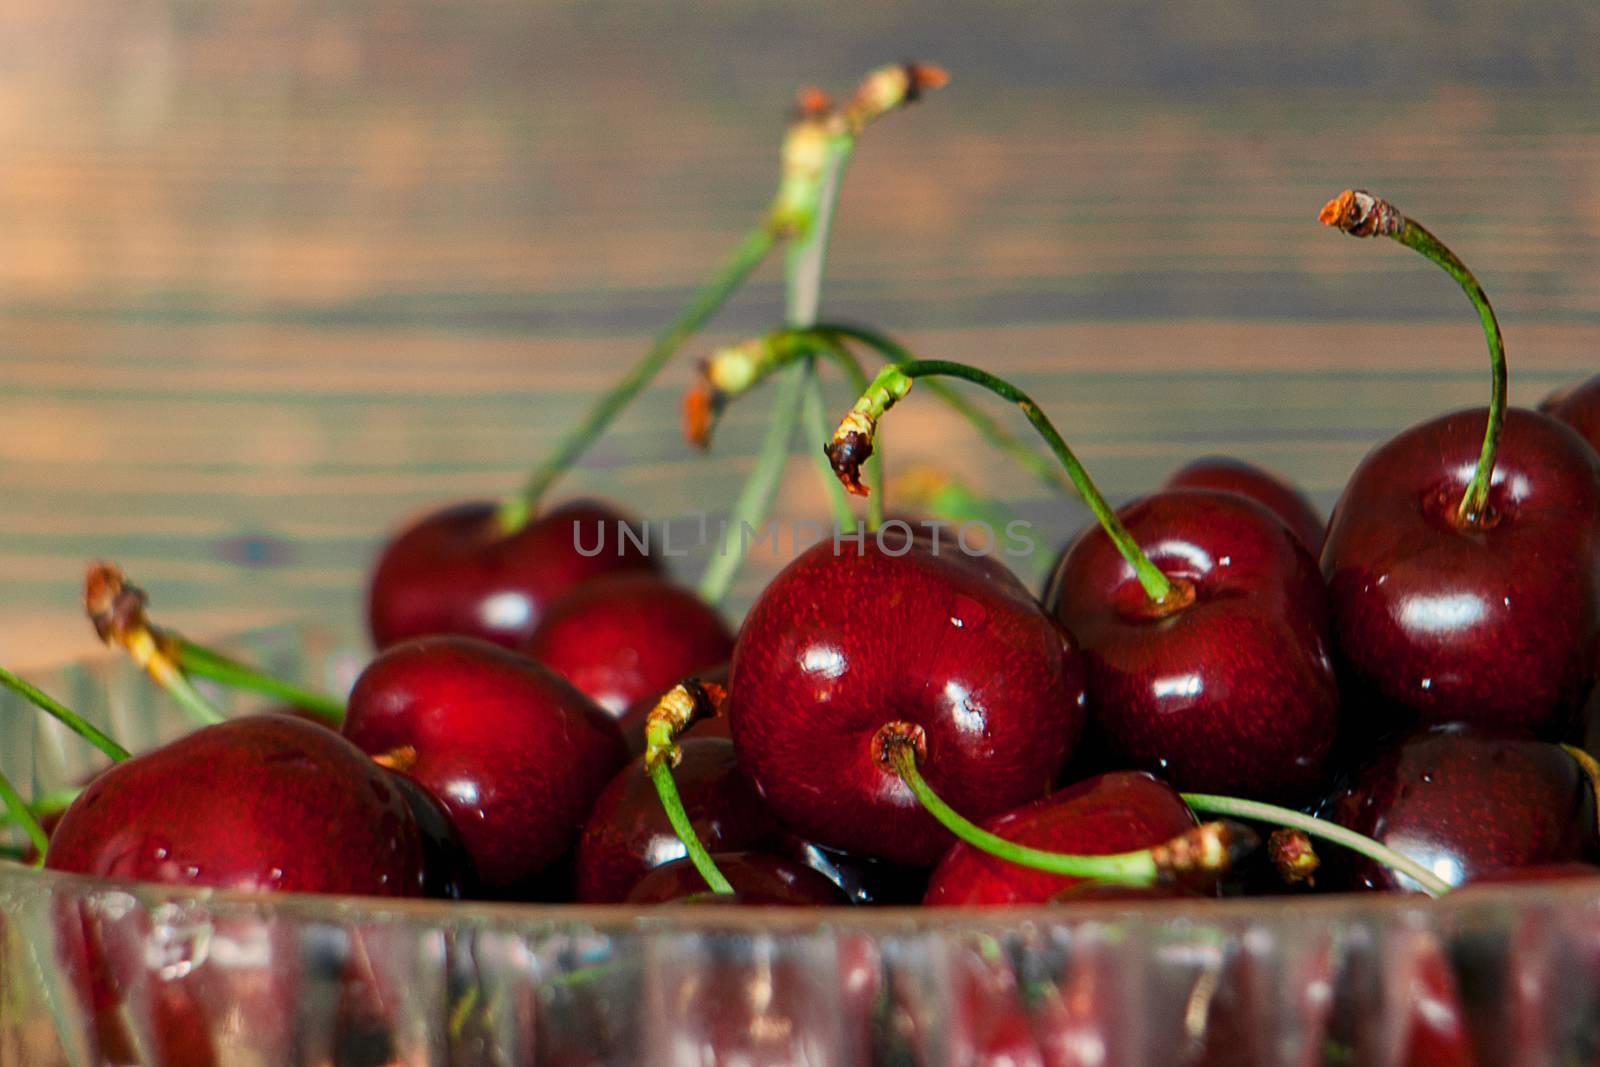 Fresh cherries in jar on the wooden background. Selective focus. Focus on the right cherries in front of jar.